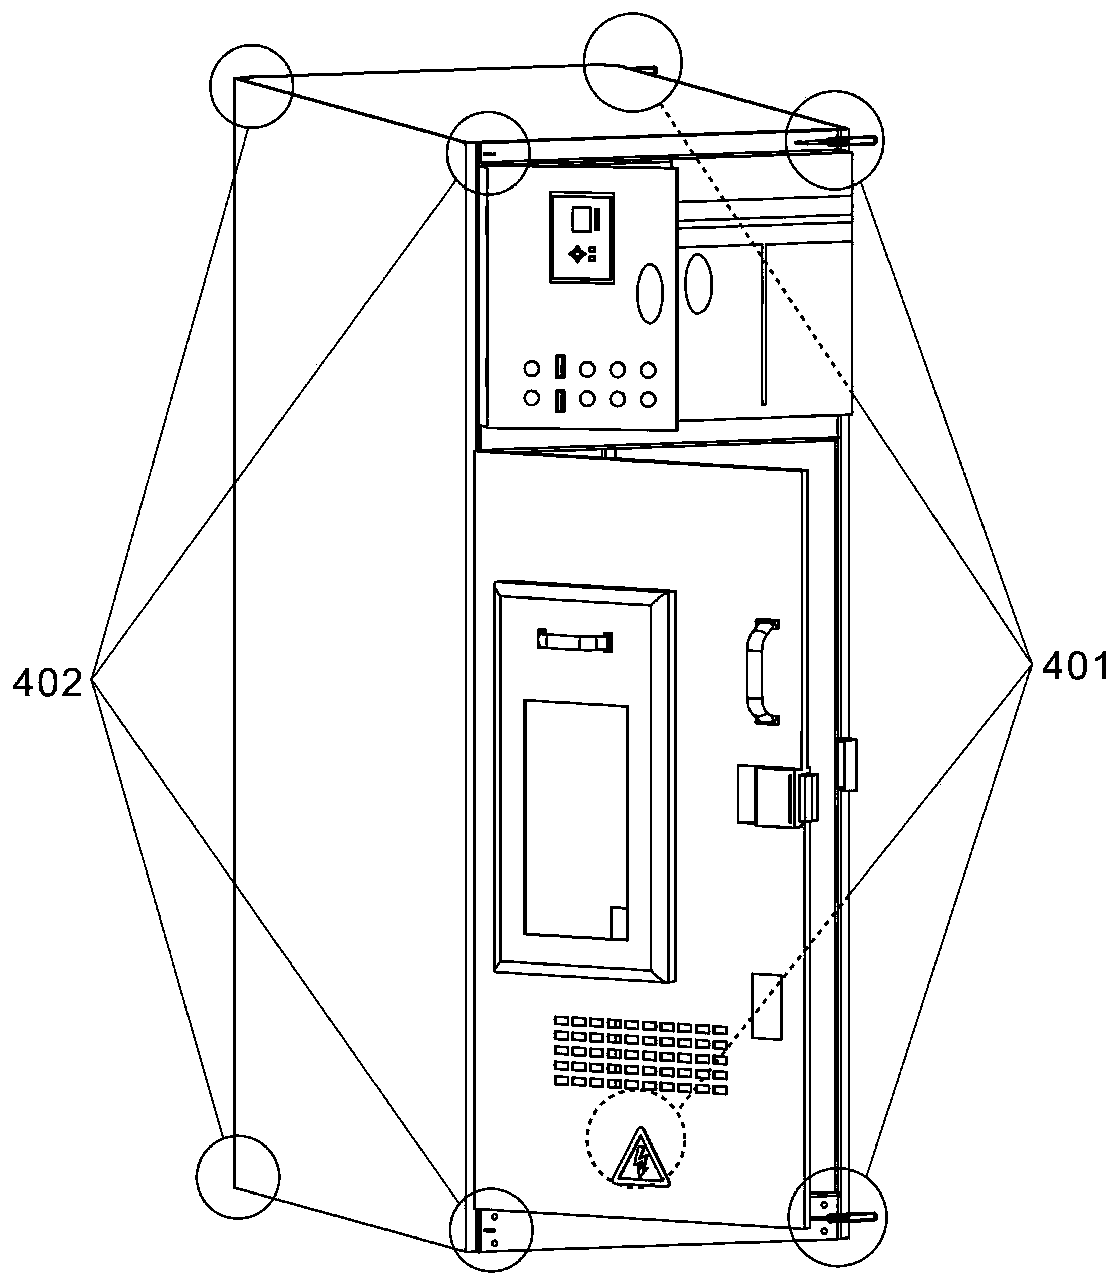 A modular ring network cabinet